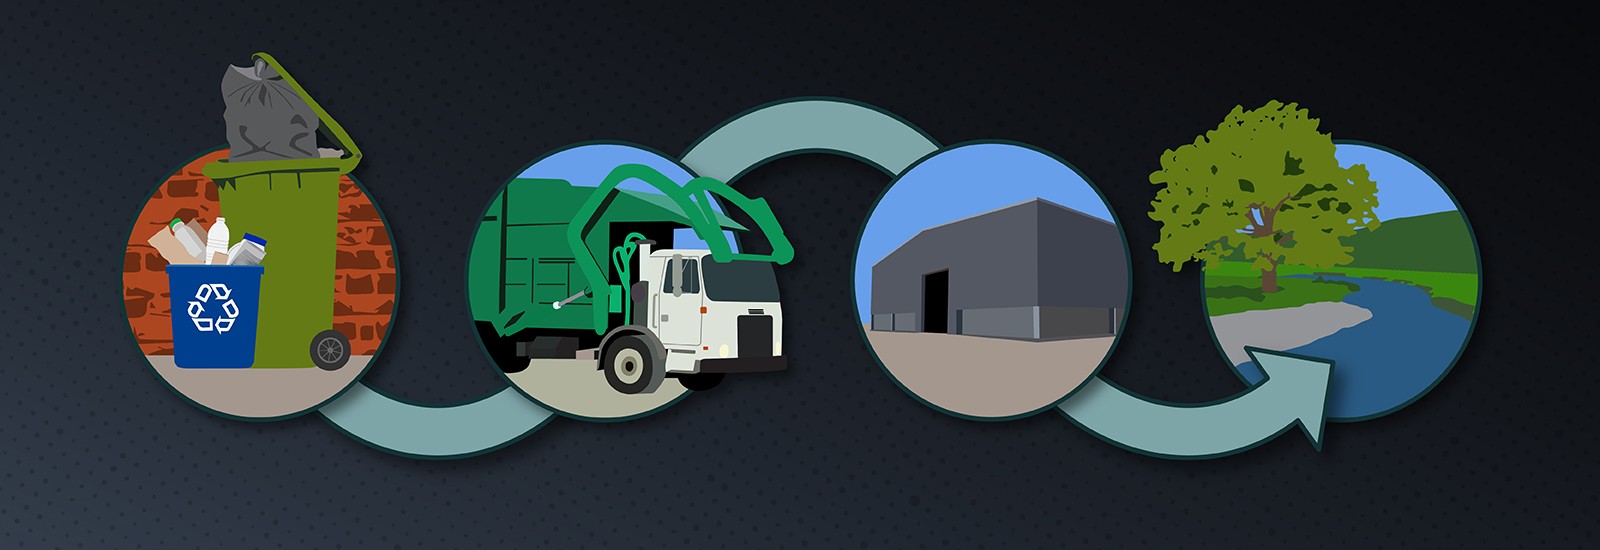 Illustrated recycling diagram